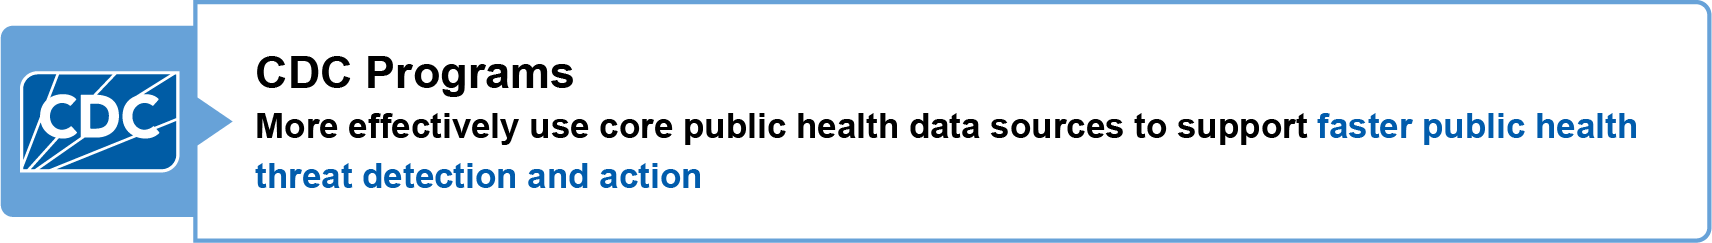 CDC Programs: More effectively use core public health data sources to support faster public health threat detection and action